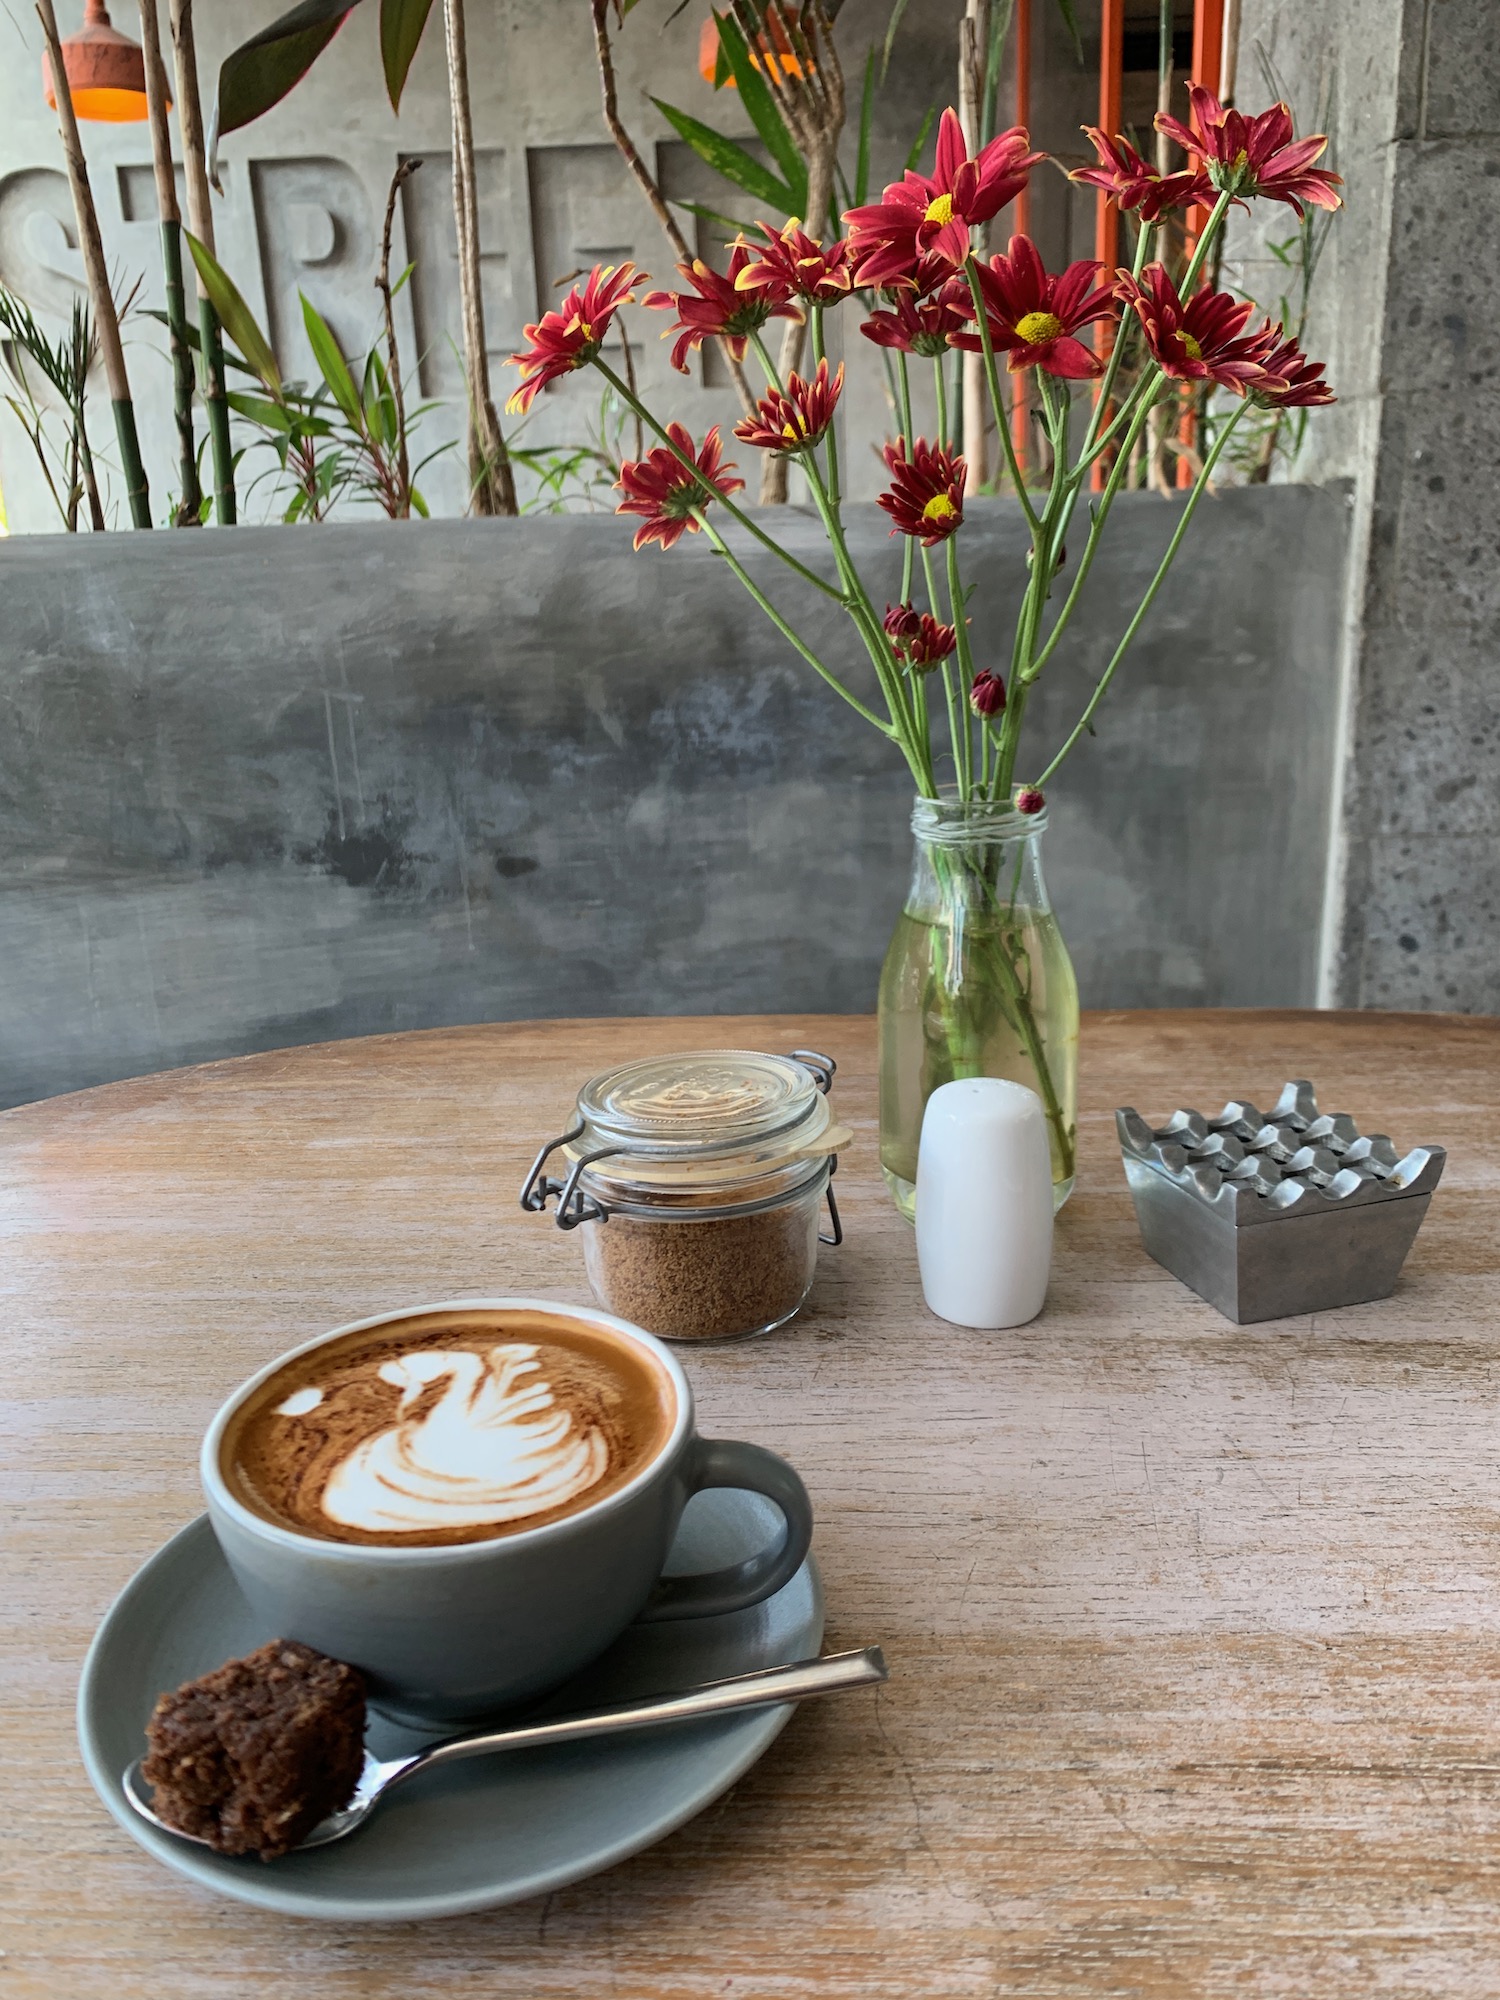 a cup of coffee and brownie on a table with red flowers